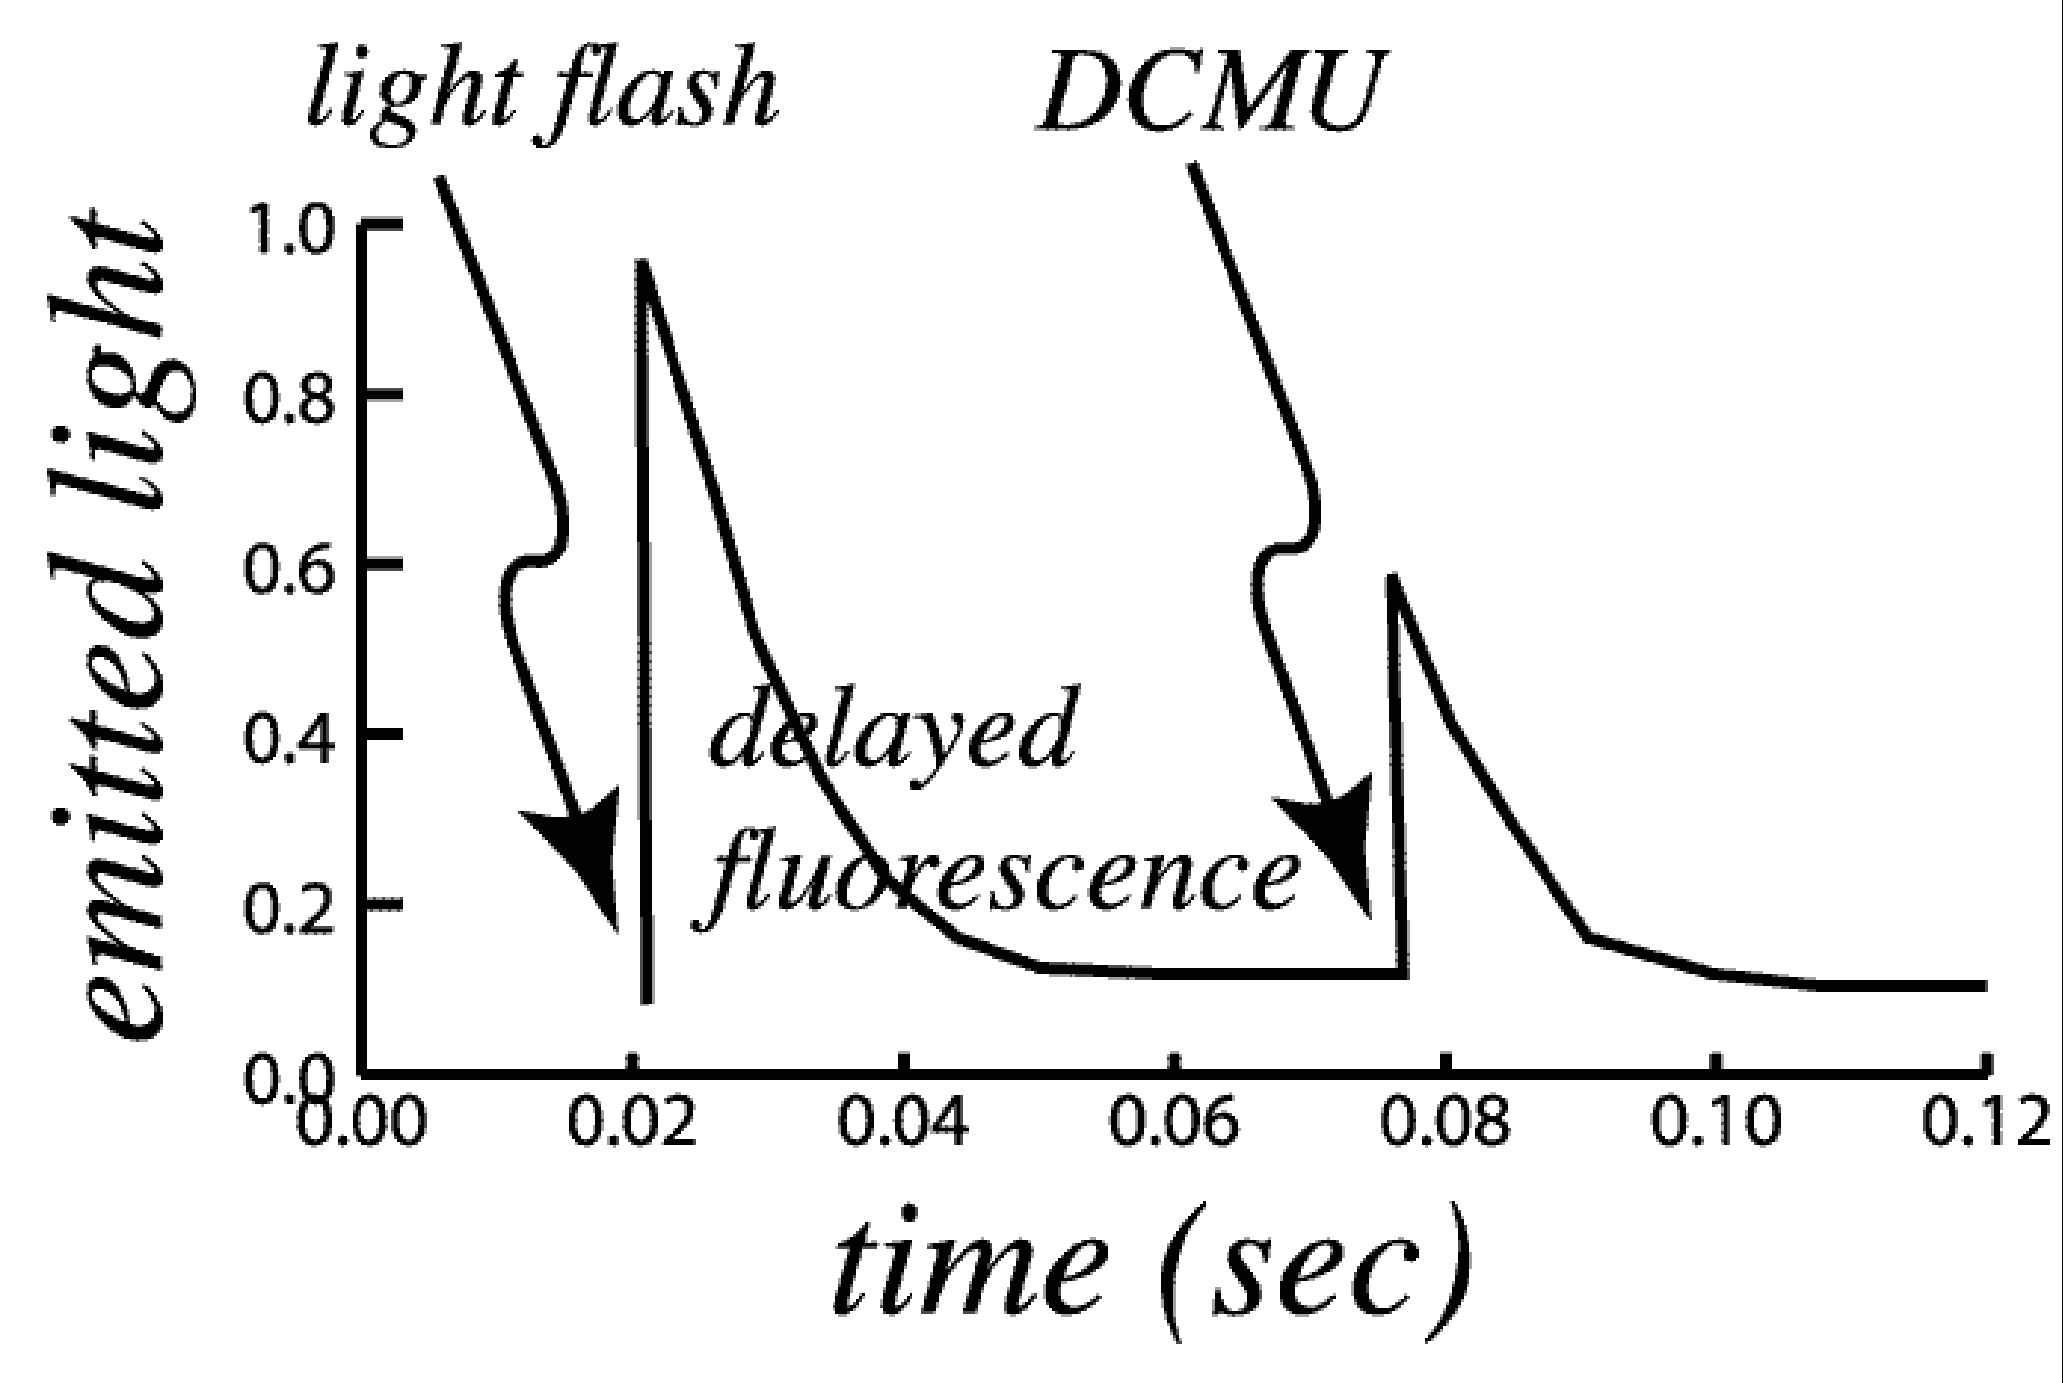 experiment demonstrates delayed fluorescence using DCMU